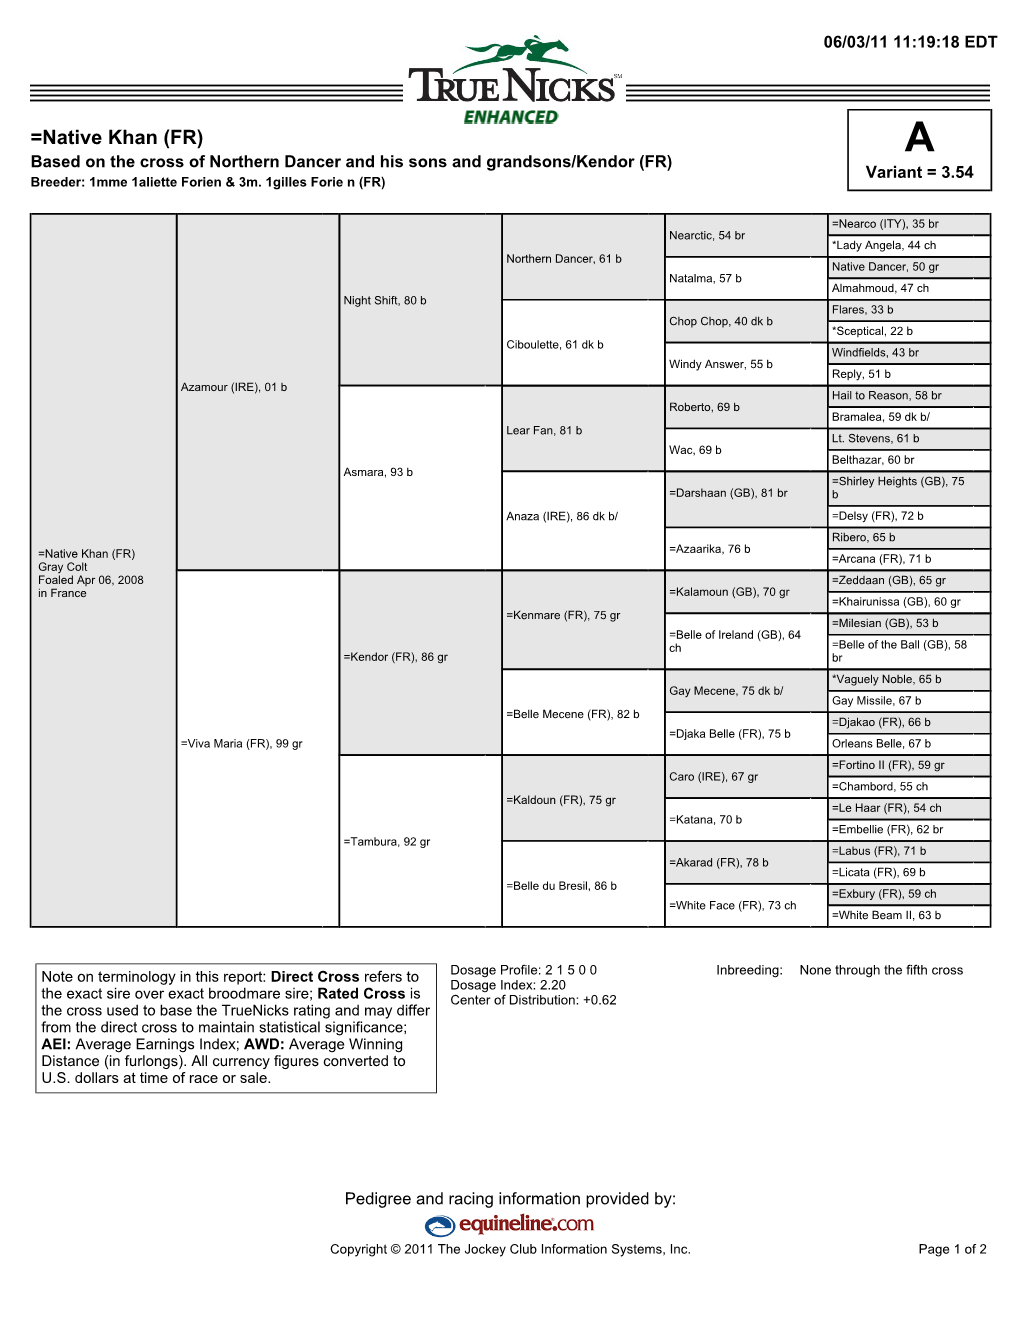 =Native Khan (FR) a Based on the Cross of Northern Dancer and His Sons and Grandsons/Kendor (FR) Variant = 3.54 Breeder: 1Mme 1Aliette Forien & 3M